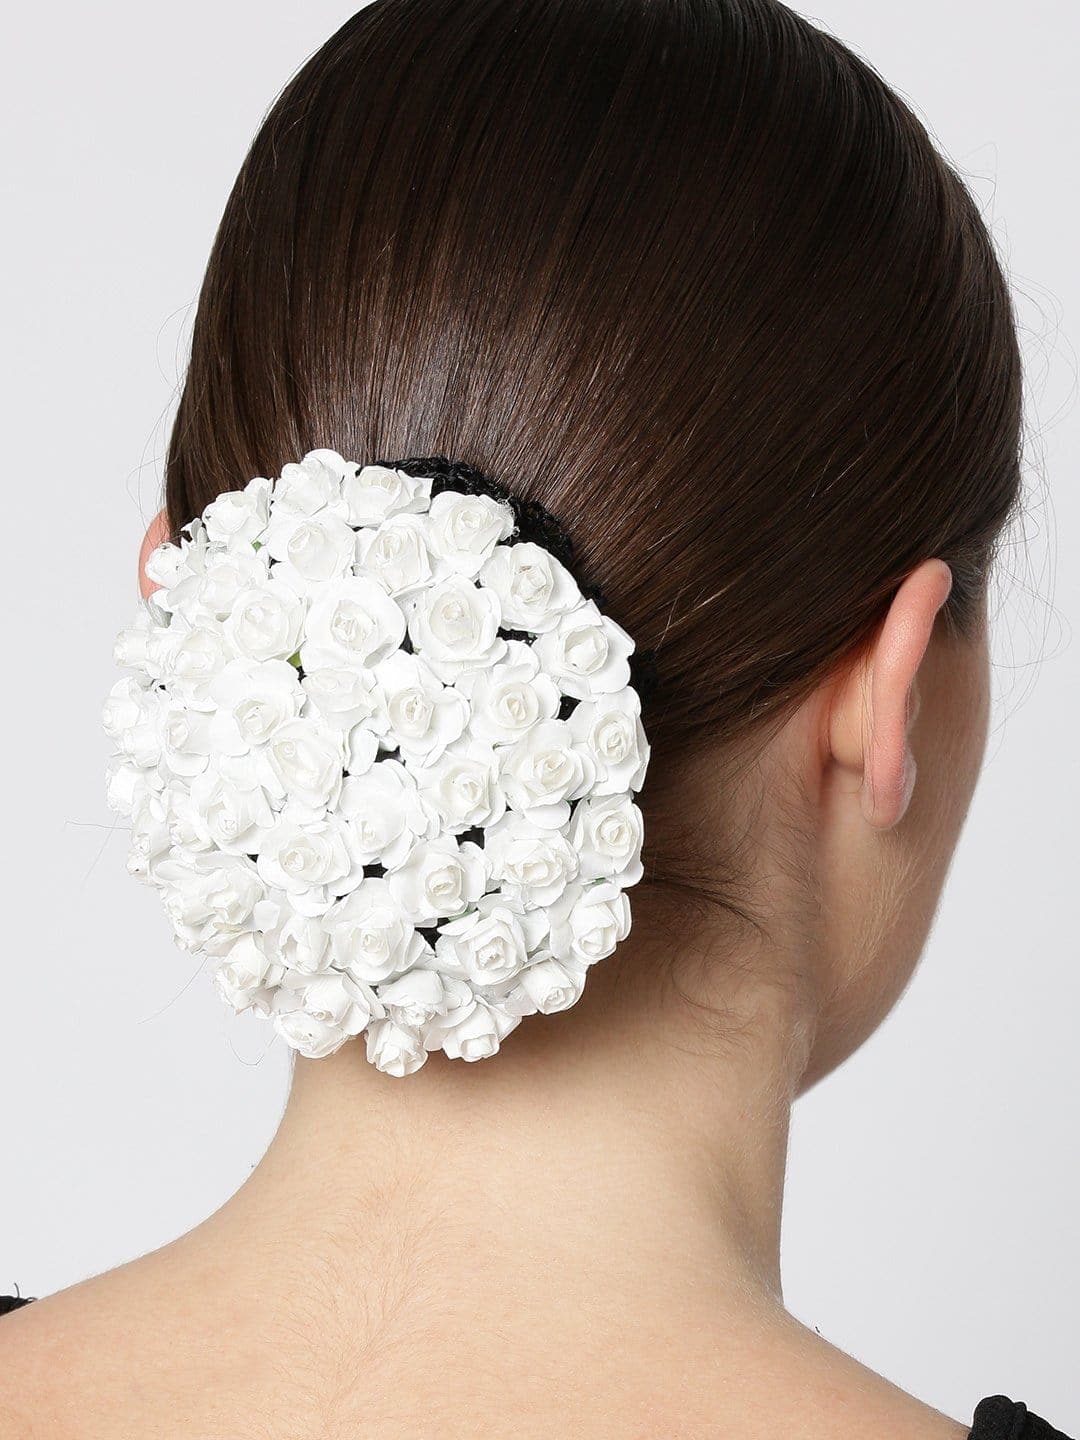 Hair Accessories for Women  Free People  Bun pins Hair accessories for  women Free people hair